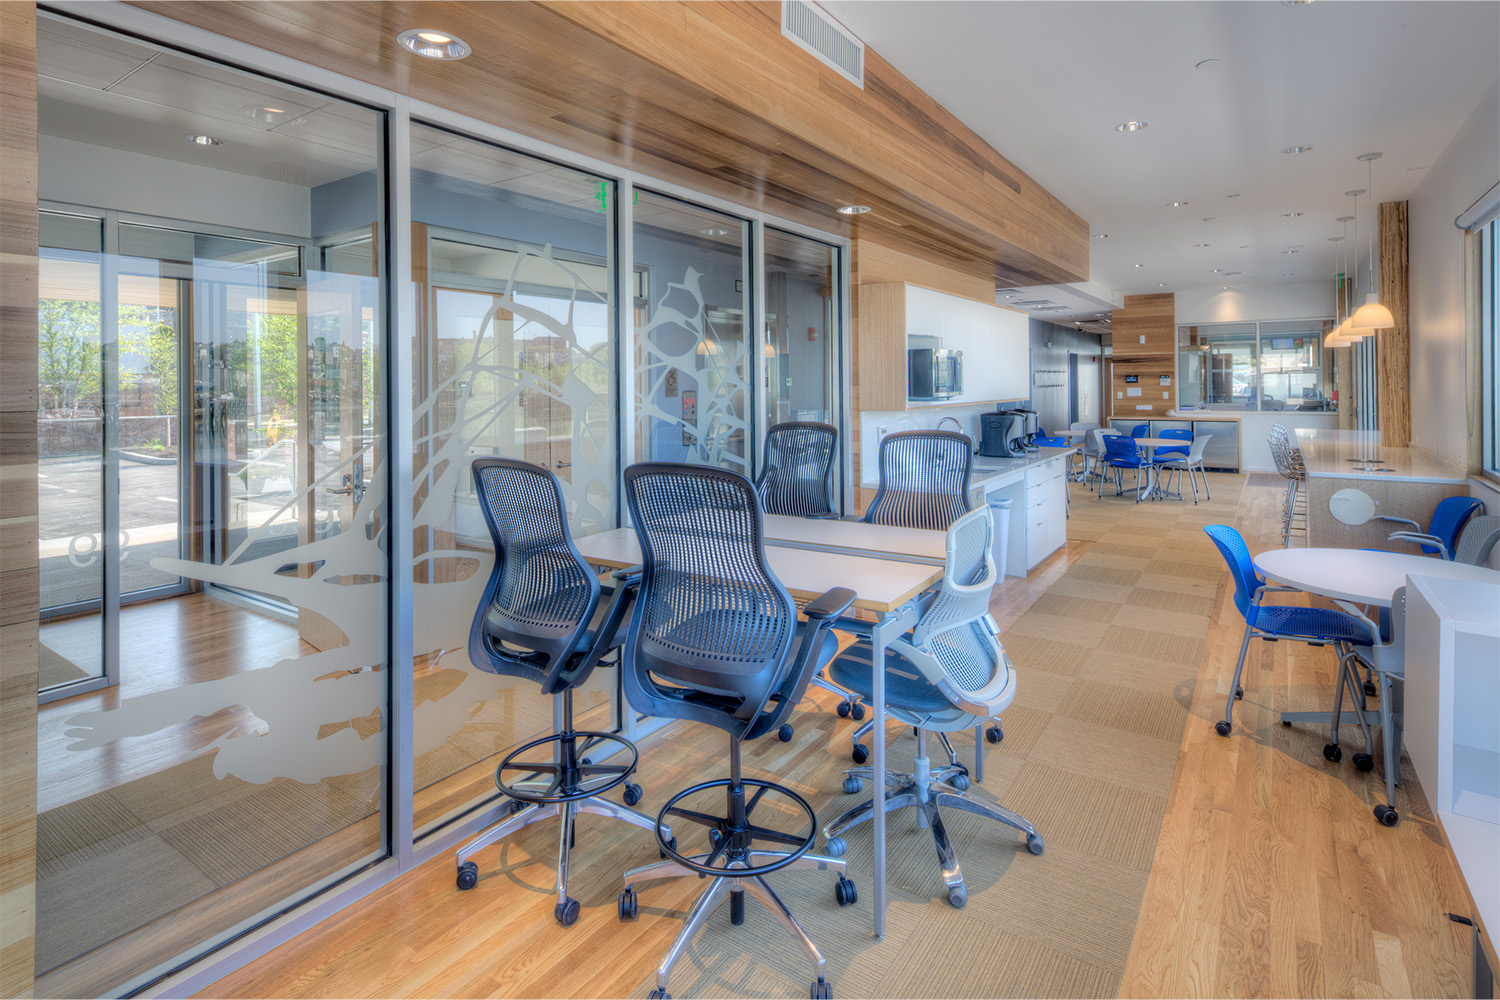 Tables and rolling chairs to utilize work space, along with multiple windows to allow ample lighting